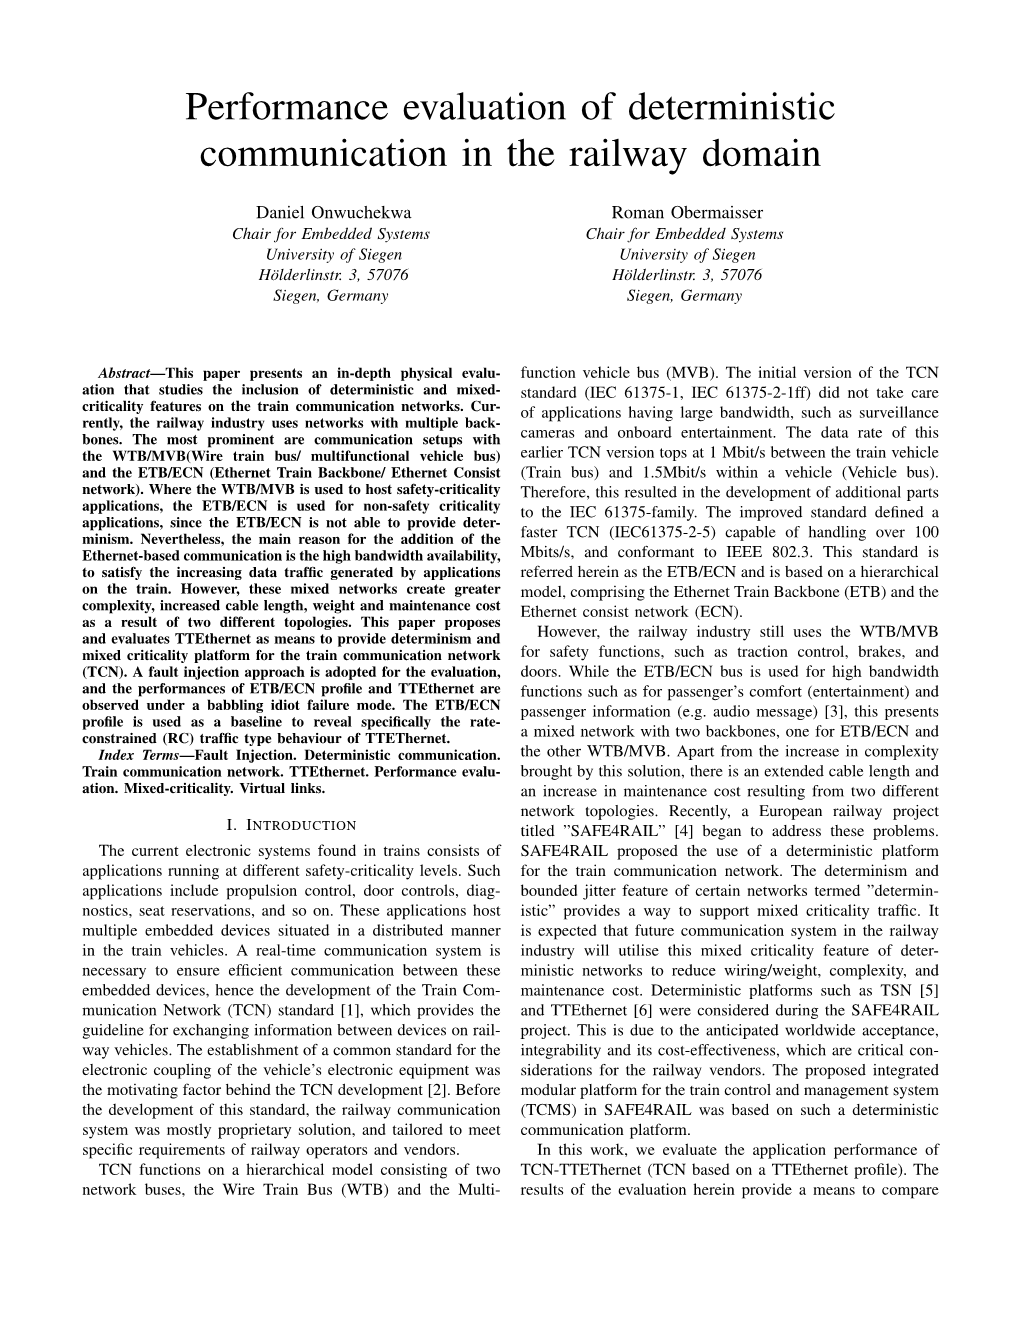 Performance Evaluation of Deterministic Communication in the Railway Domain